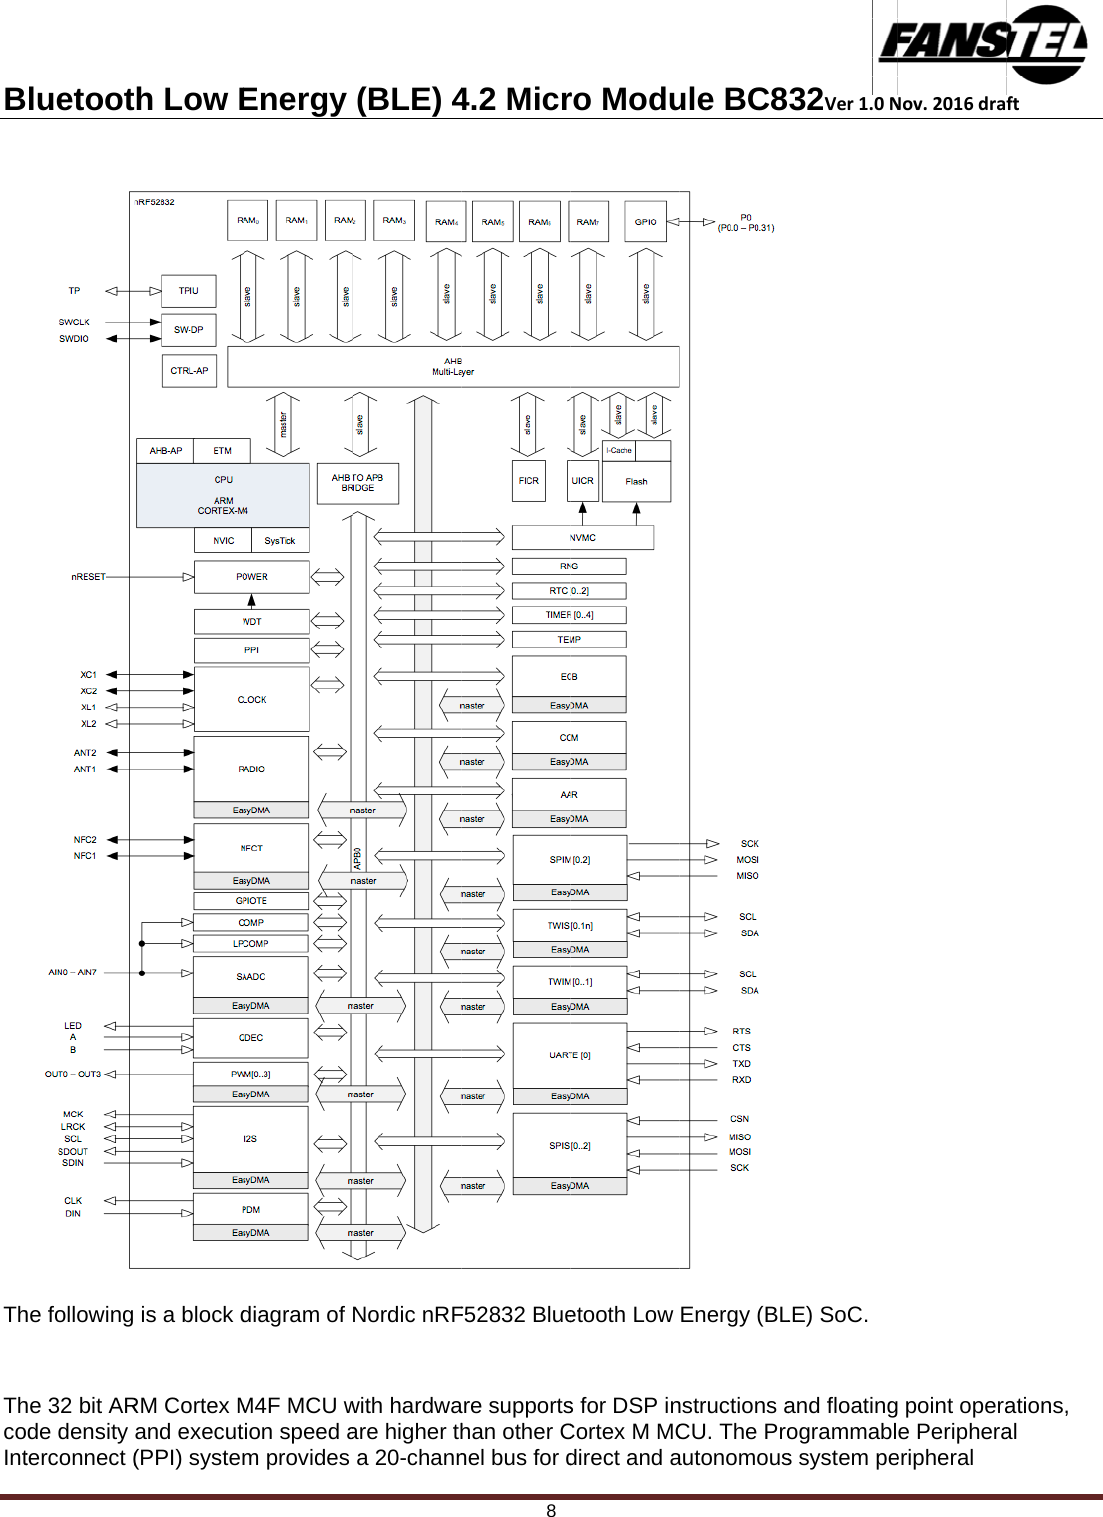 BTh ThcoIntluetoothe following he 32 bit ARde density terconnect (h Low Eis a block dRM Cortex Mand execut(PPI) systemEnergy diagram of M4F MCU wion speed am provides (BLE) 4Nordic nRFwith hardwaare higher tha 20-chann4.2 Micr8 F52832 Blueare supportshan other Cnel bus for dro Moduetooth Low s for DSP inCortex M MCdirect and aule BC8Energy (BLnstructions aCU. The Proautonomous32Ver1.0NLE) SoC. and floatingogrammabls system peNov.2016dra point operae Peripheraeripheral ft ations, al 